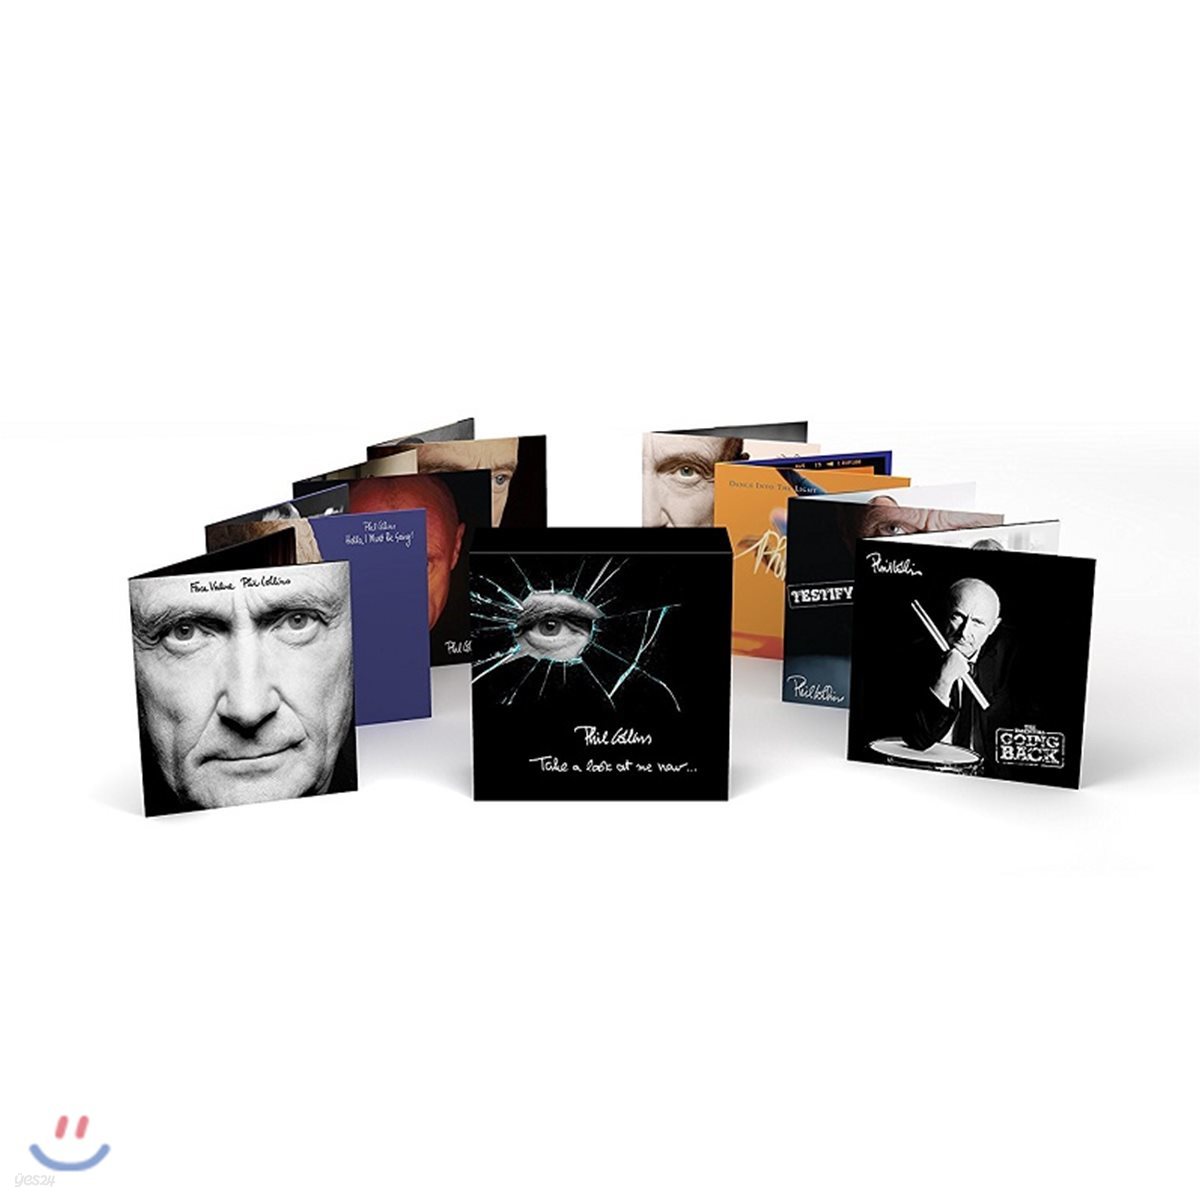 Phil Collins (필 콜린스) - Take A Look At Me Now : The Complete Albums (Deluxe Edition)